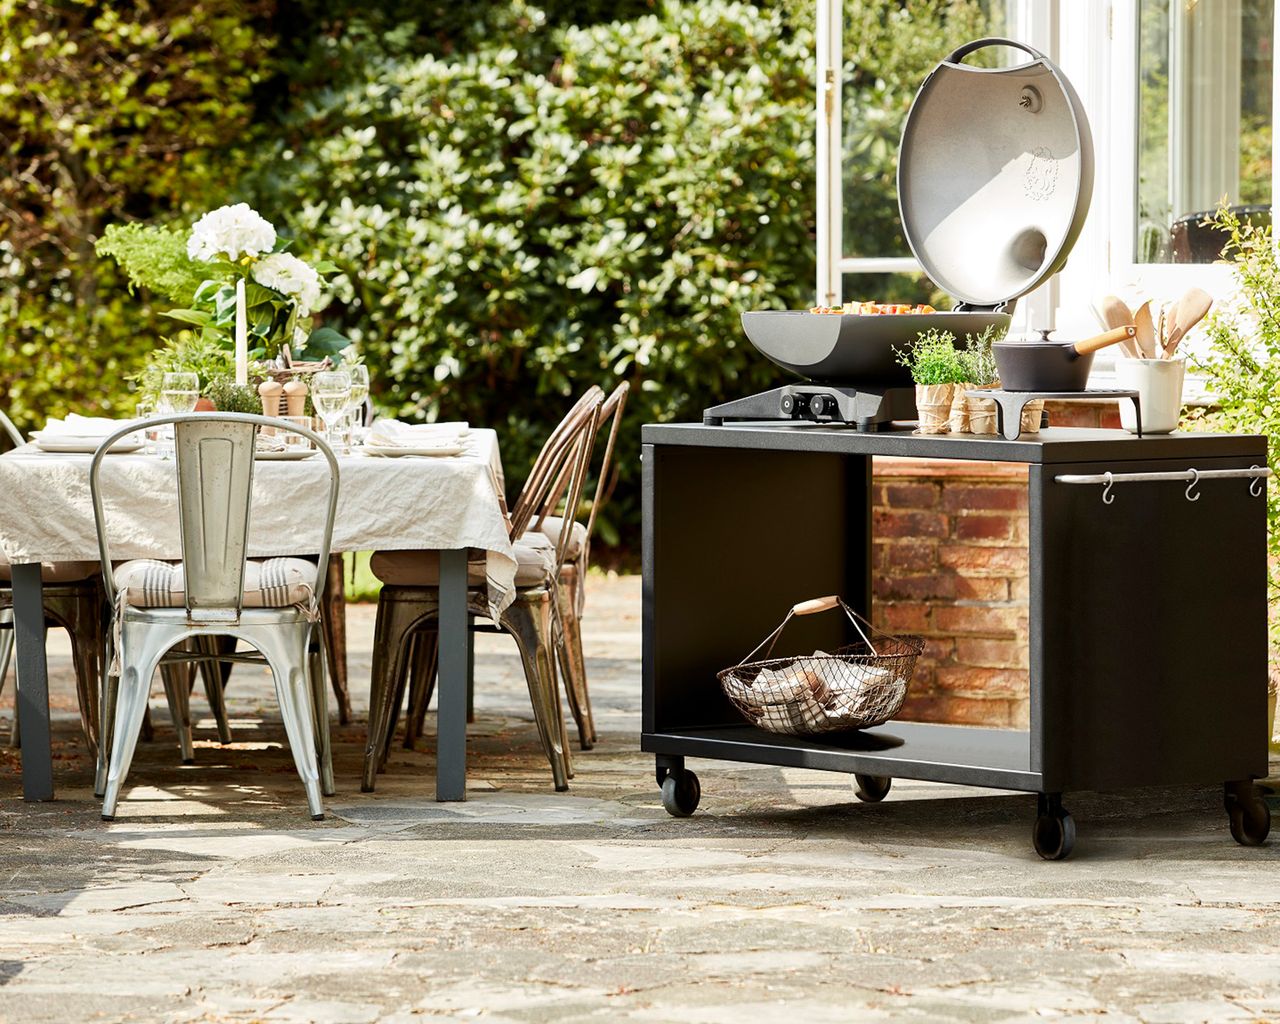 How to plan an outdoor kitchen: a step-by-step guide